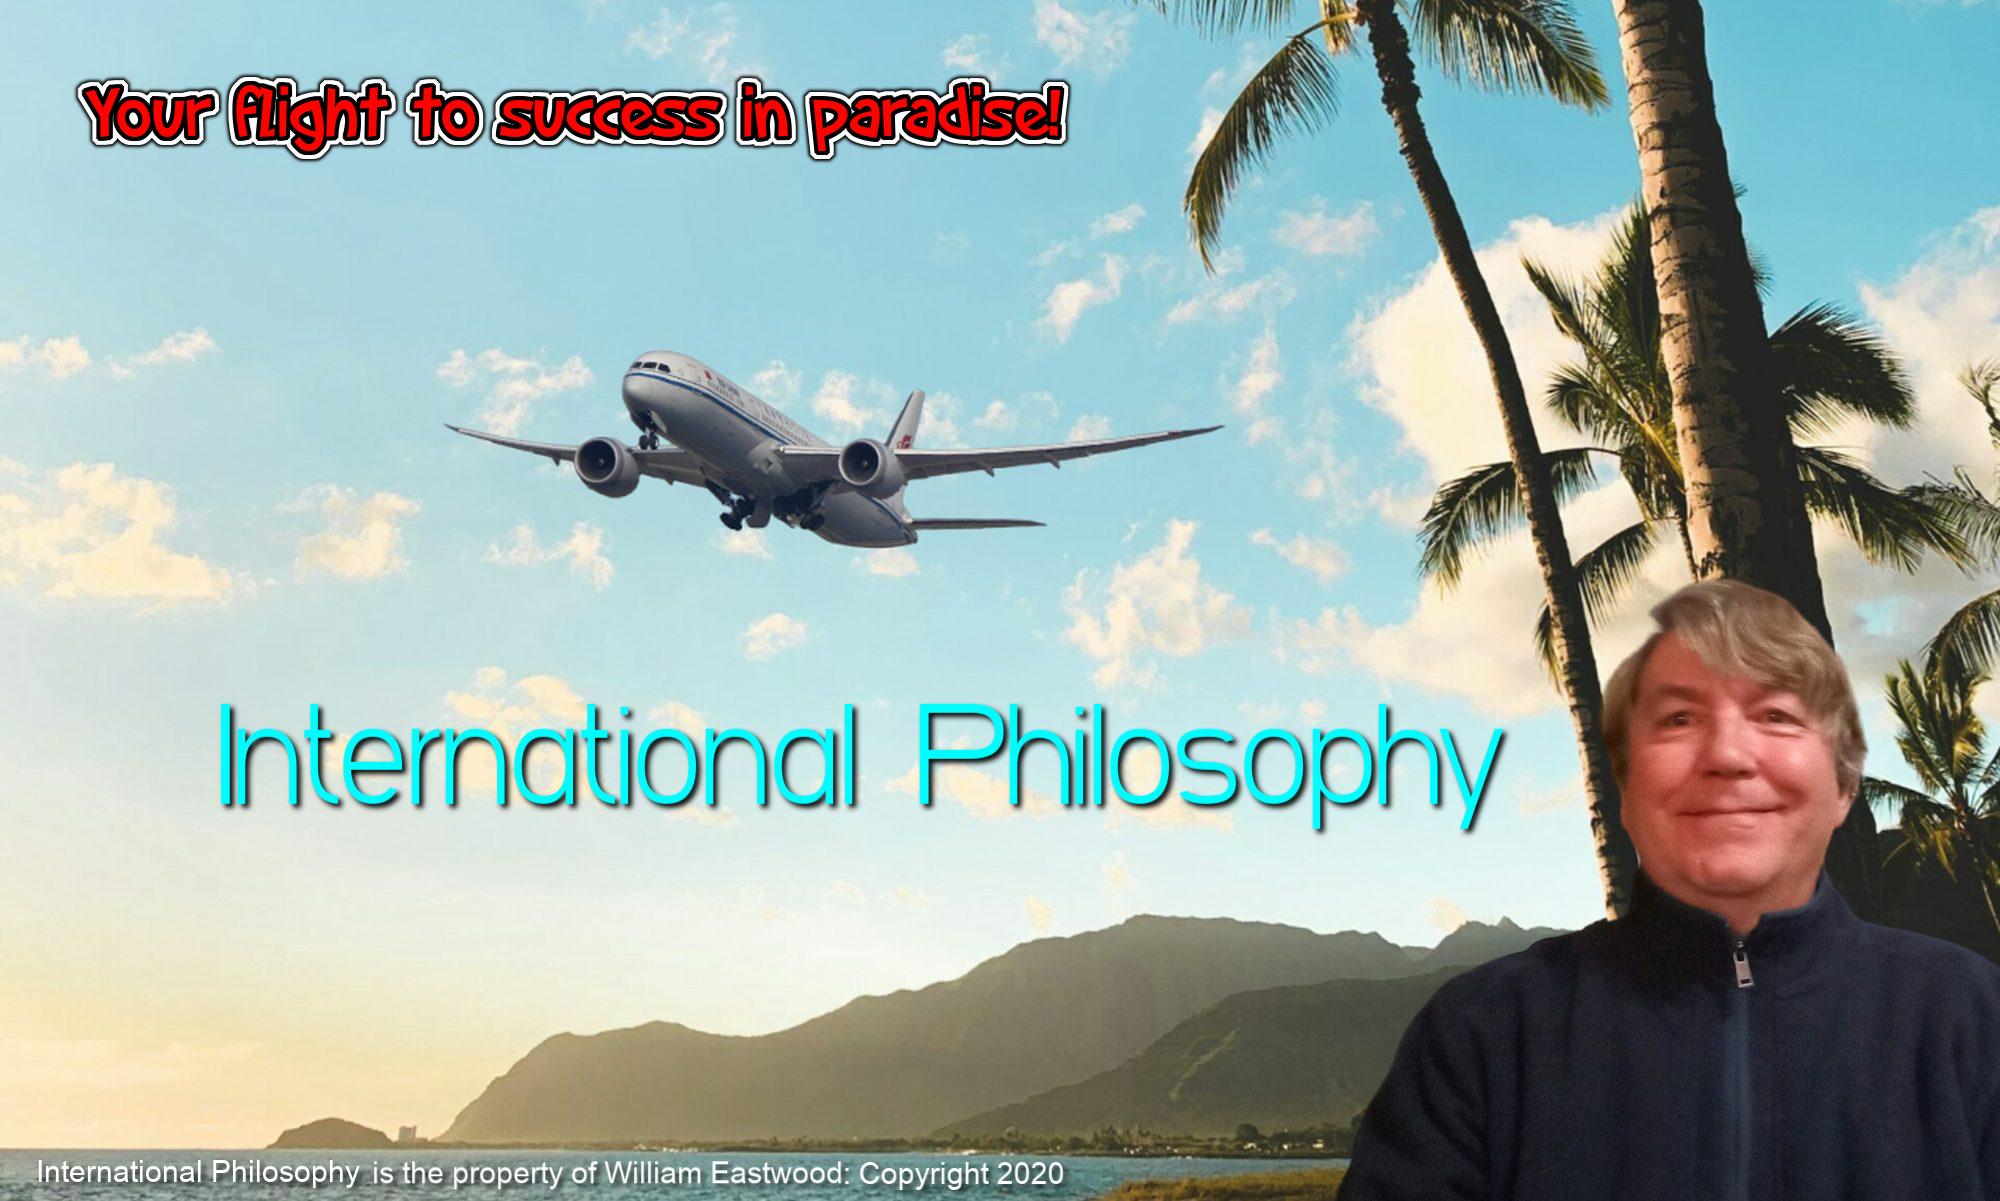 International Philosophy by William Eastwood arrival